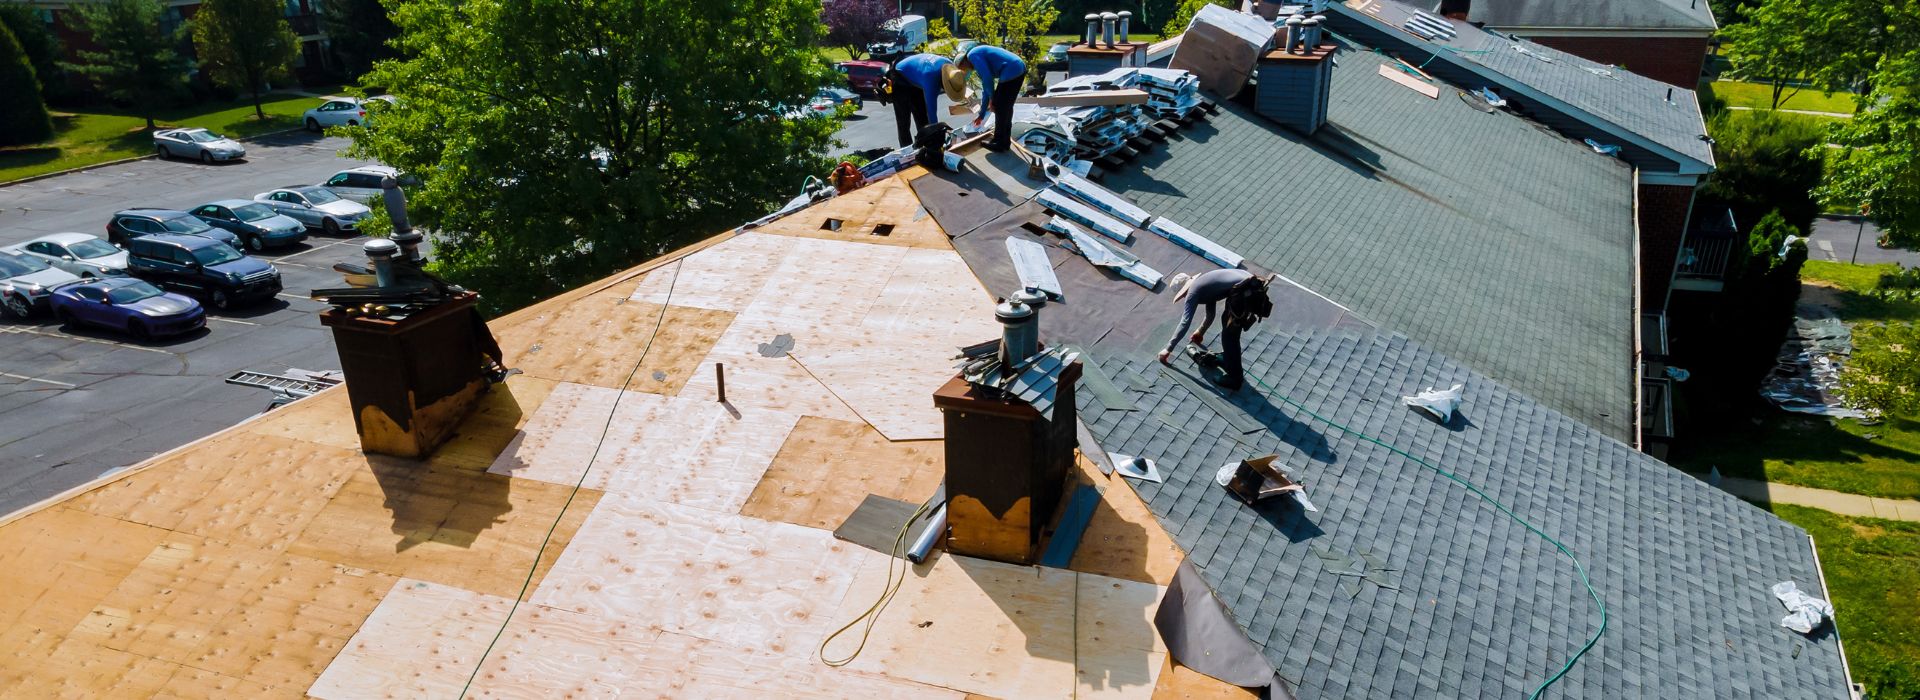 How Much Does Roof Replacement Cost In Canada?